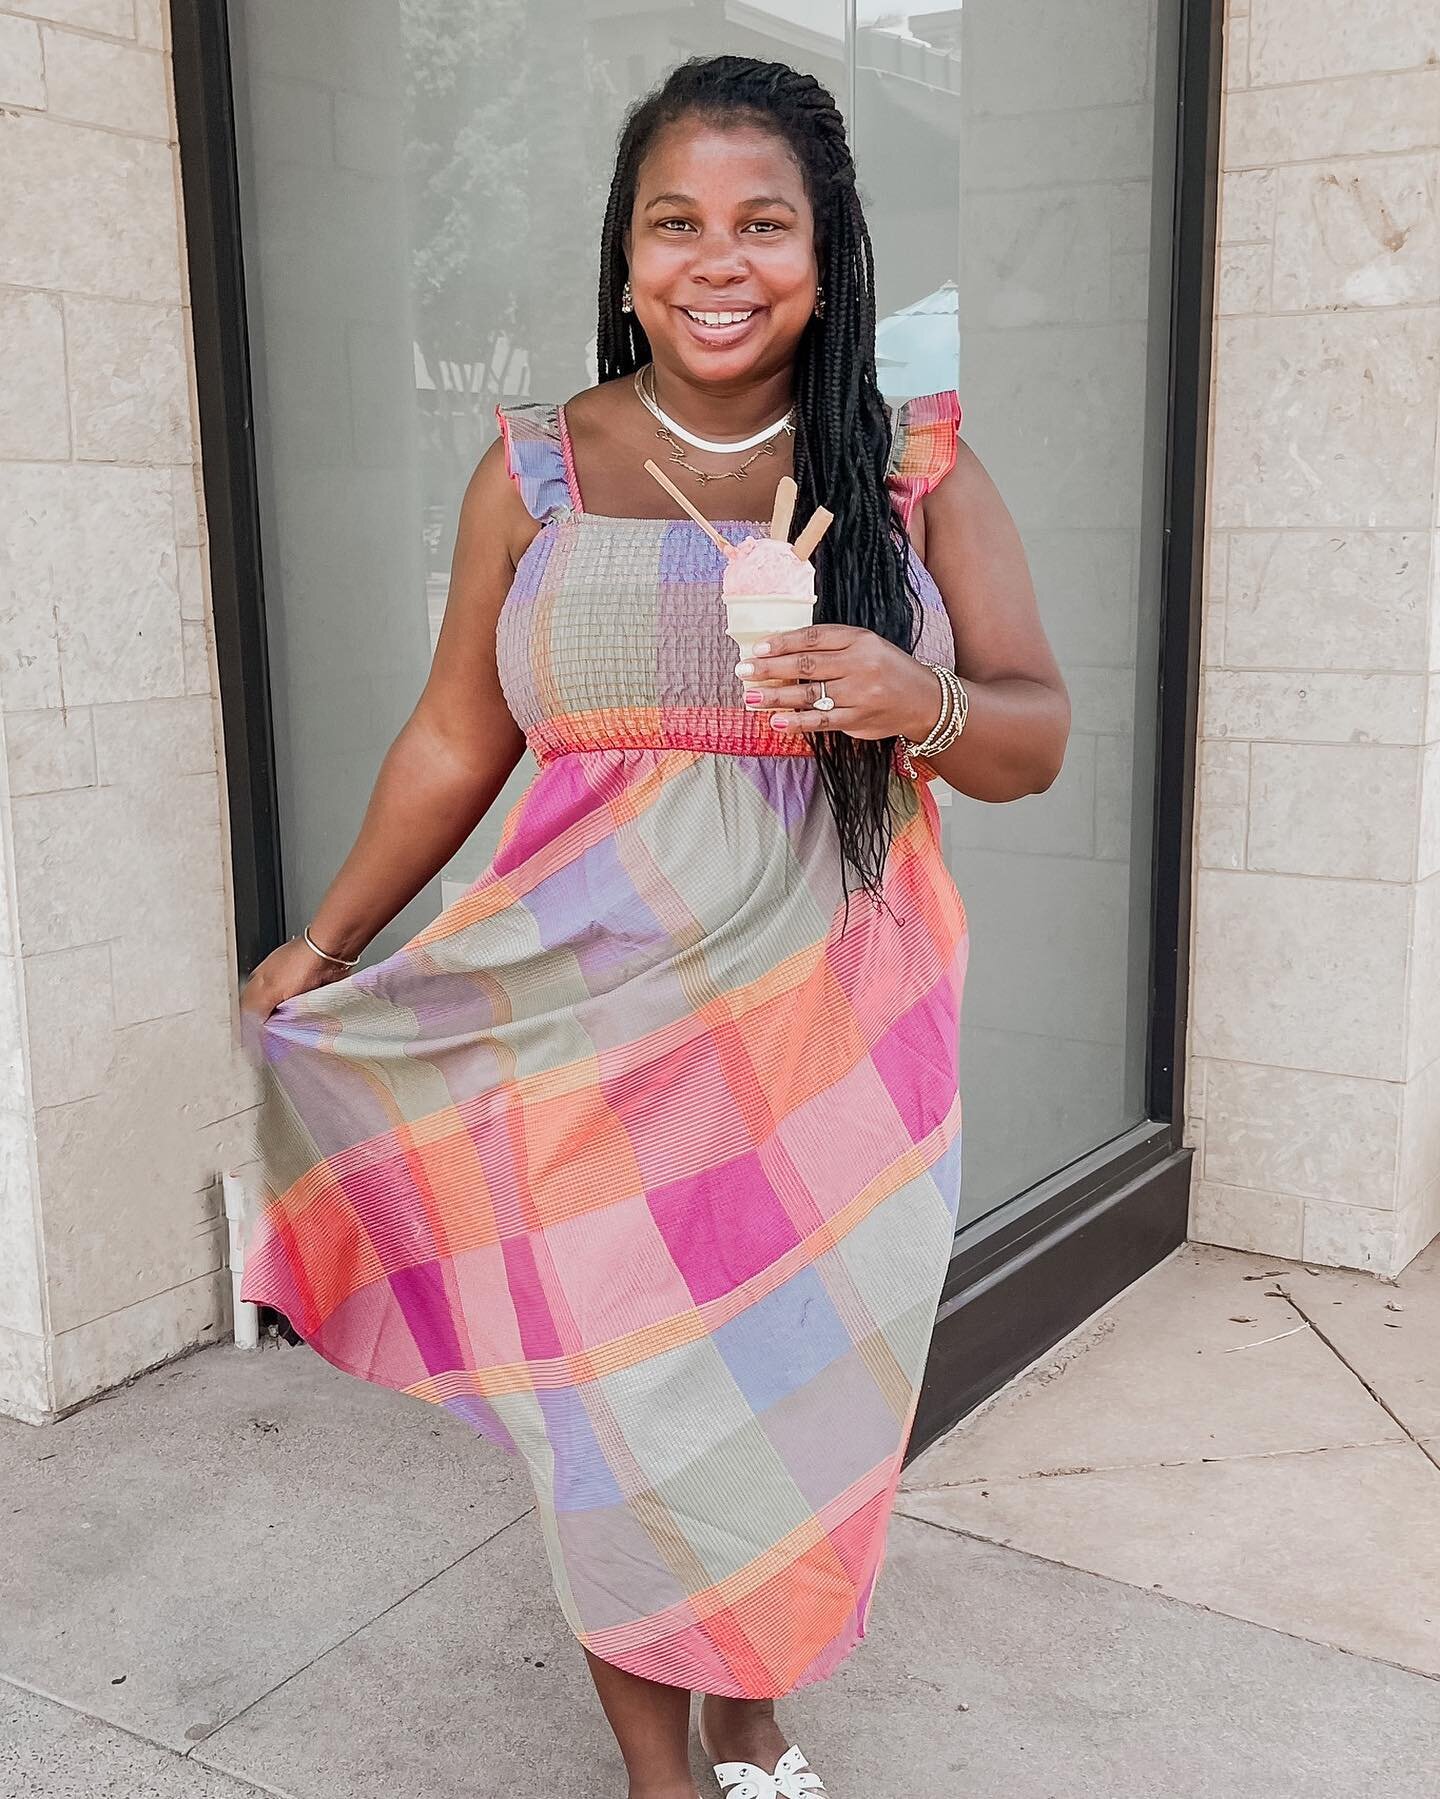 𝘚𝘶𝘮𝘮𝘦𝘳 𝘪𝘴 𝘤𝘰𝘮𝘪𝘯𝘨 𝘪𝘯 𝘏𝘖𝘛! 🔥⁣
⁣
Y&rsquo;all! I&rsquo;m ready for the summer and all the cute fashion that goes along with it! And can I just say Walmart&rsquo;s new summer collection is giving me everything it is supposed to GIVE! P